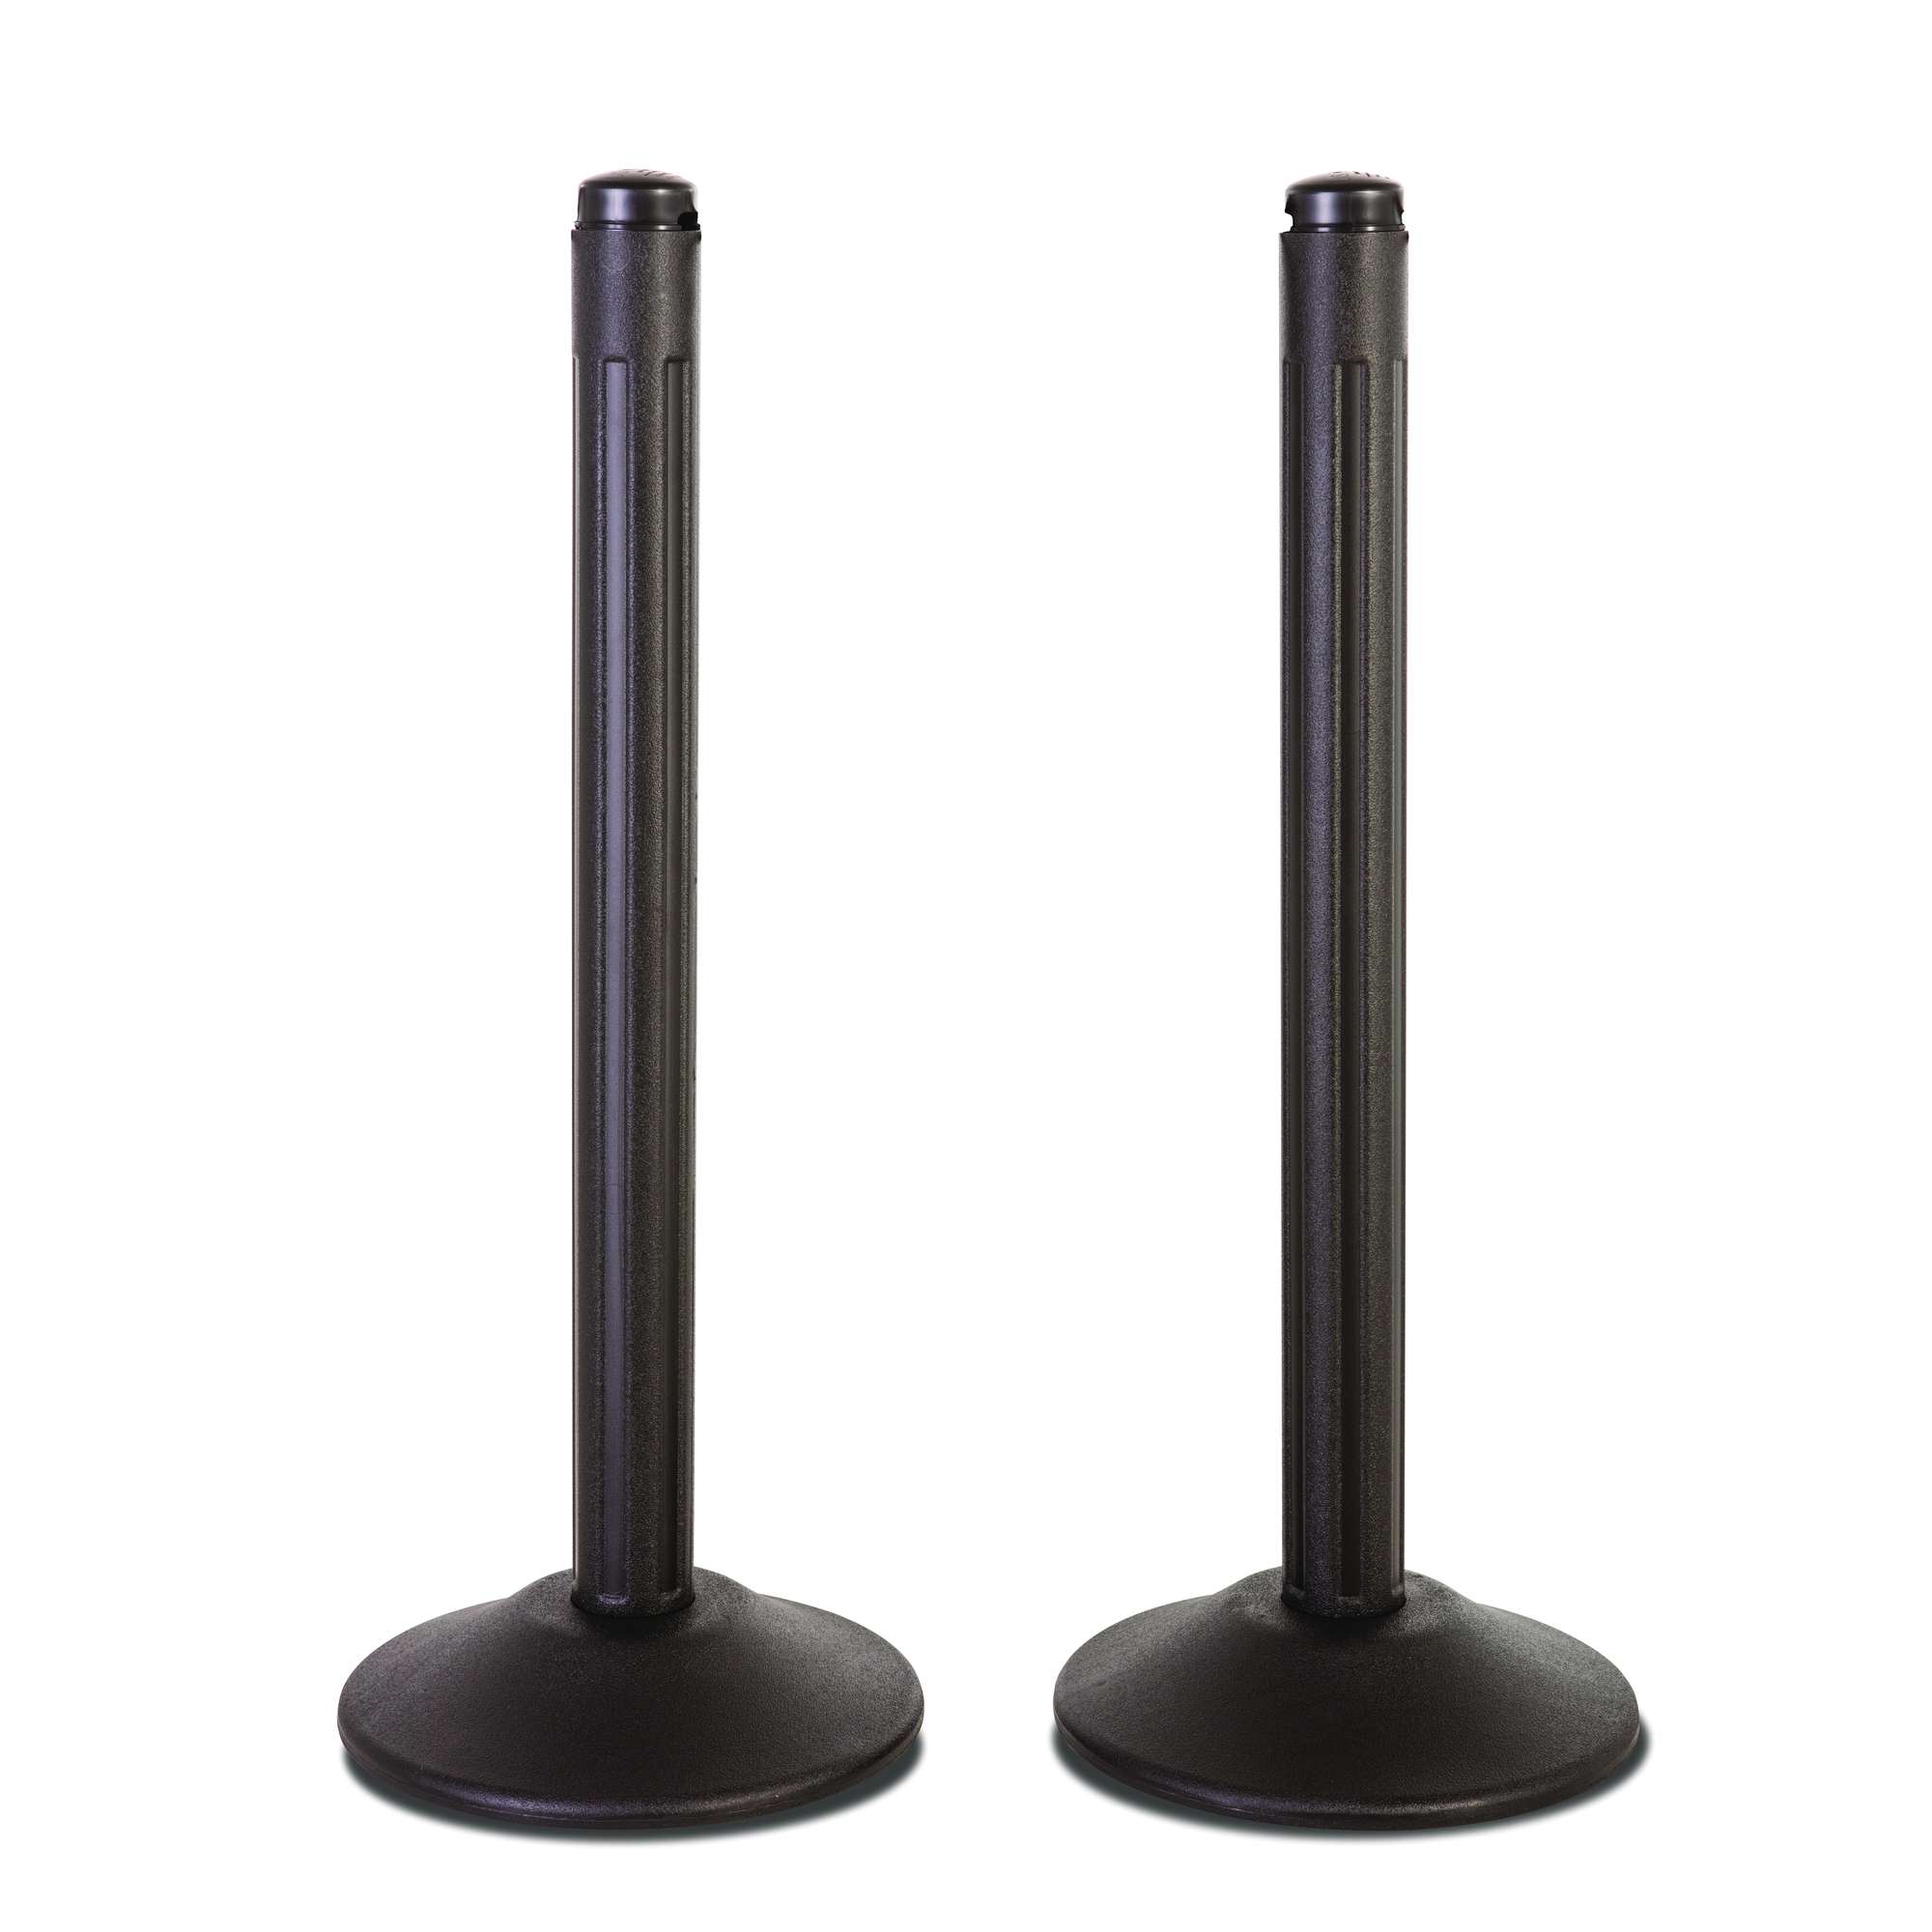 US Weight, Black post, no chain - unweighted base - 2 pack, Model U2003NC